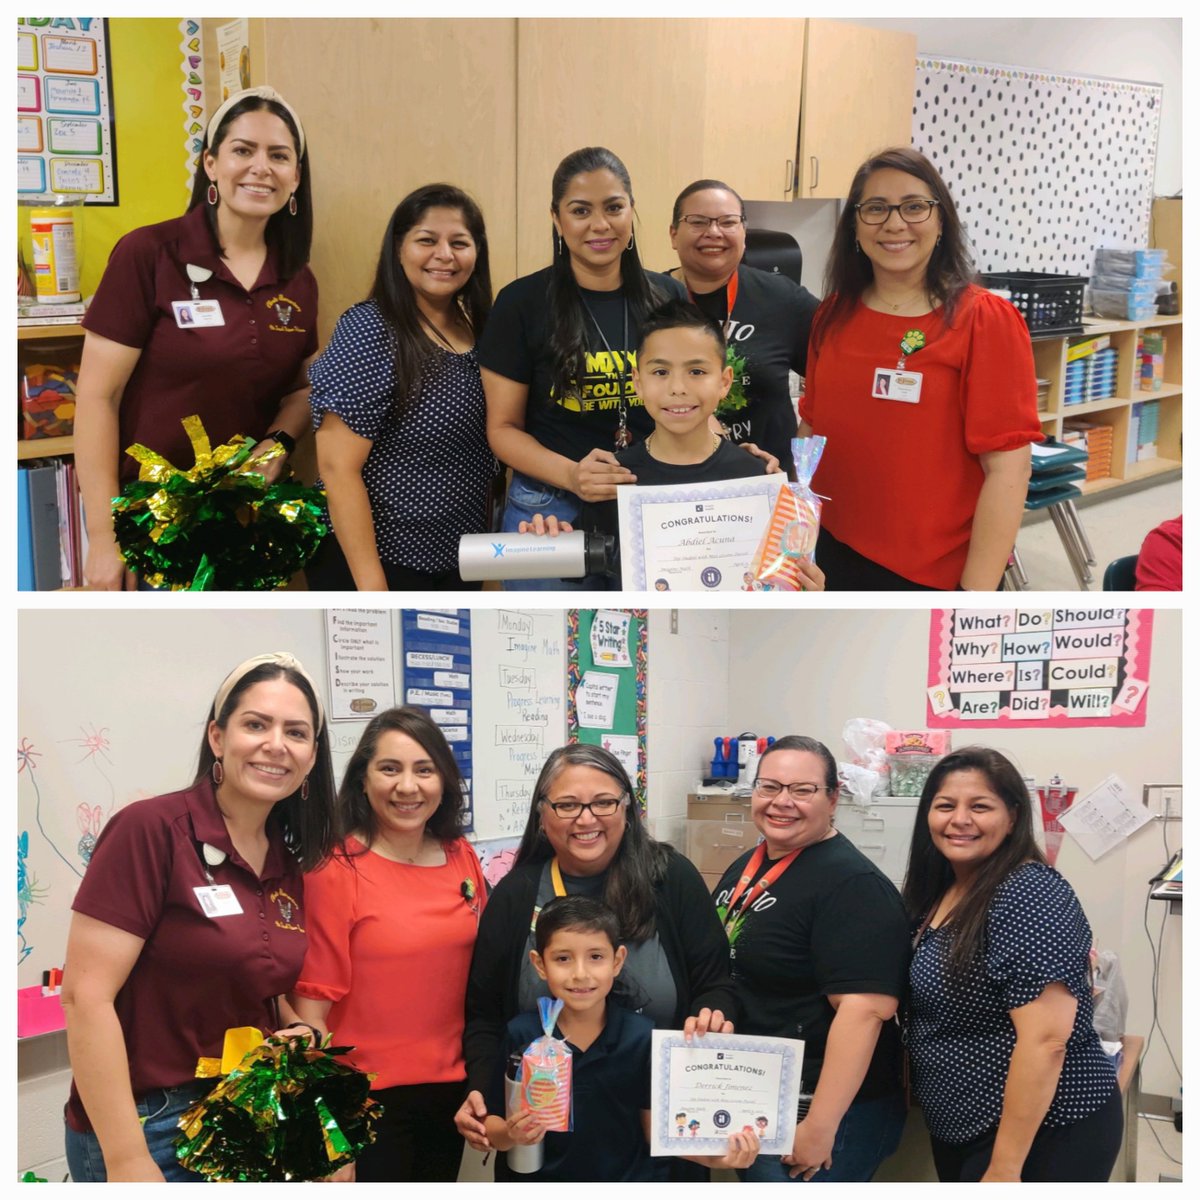 Congratulations to these wonderful students from @OES_Ocelots who won the Imagine Math Campus Top Student contest: Derrick (2nd grade) and Abdiel (4th grade)!! 🏆🎉👏 @mrs_arizpe @ImagineLearning @tudon26